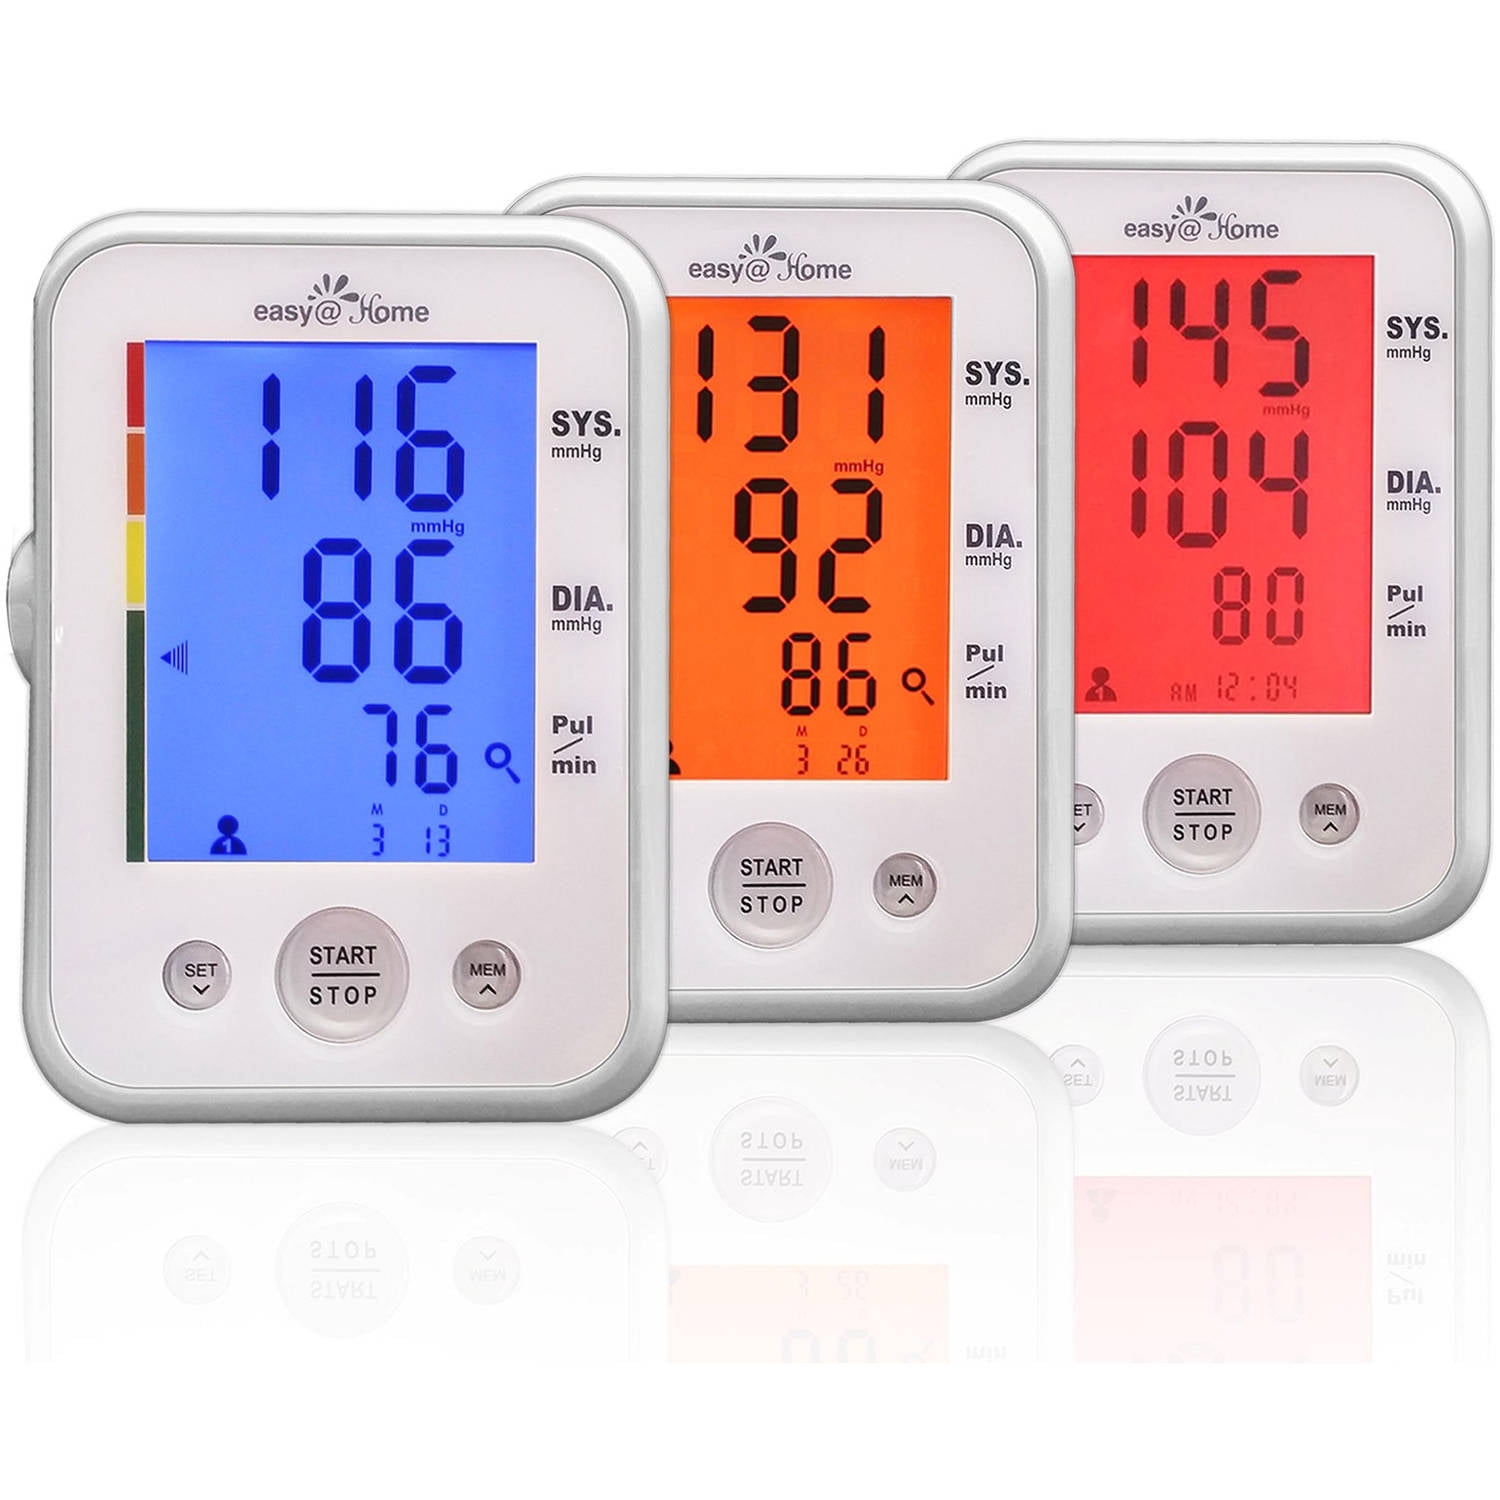 (Large Cuff) Easy@Home Digital Upper Arm Blood Pressure Monitor (BP Monitor) with 3-Color Hypertension Backlit Display and Pulse M